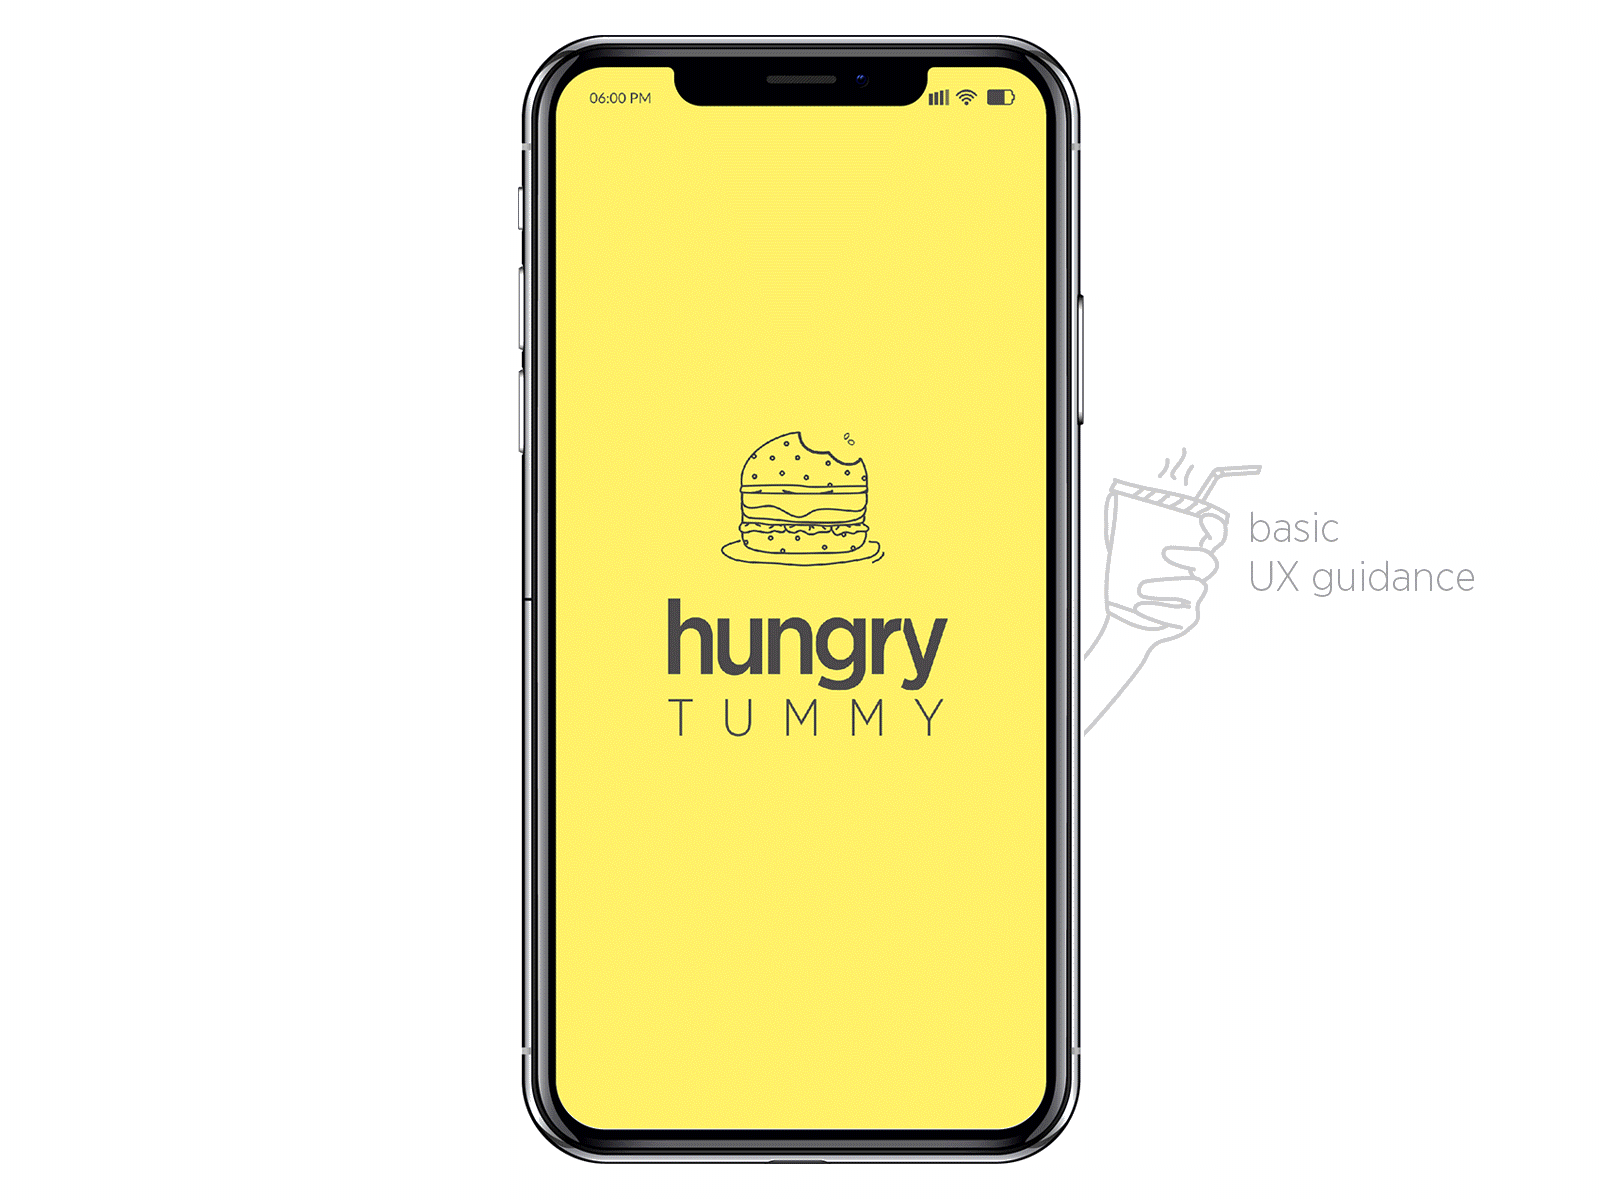 Hungry Tummy - A Food Delivery App (basic ux guidance)